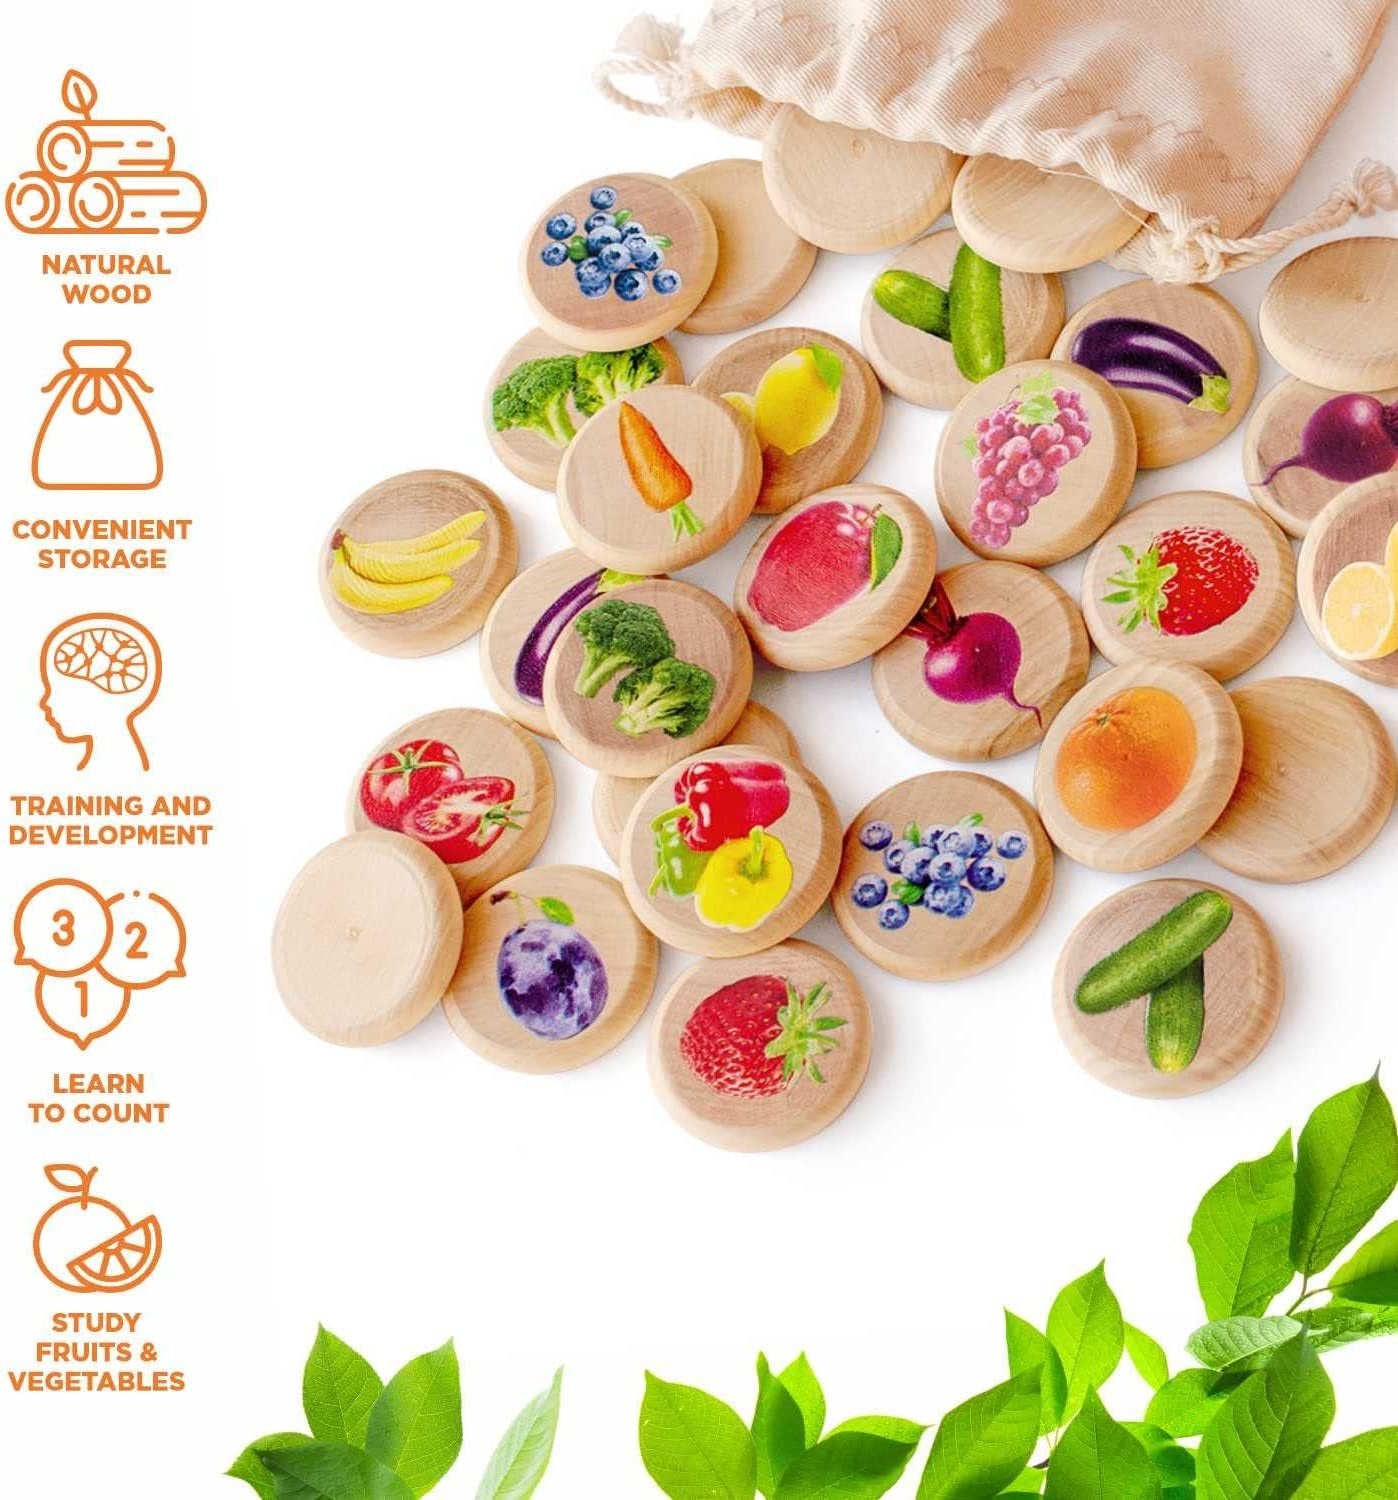 Ulanik Fruits and Vegetables Matching Memory Game for Toddlers Age 3 + Wooden Board Games for Kids 4-8 Learning & Education